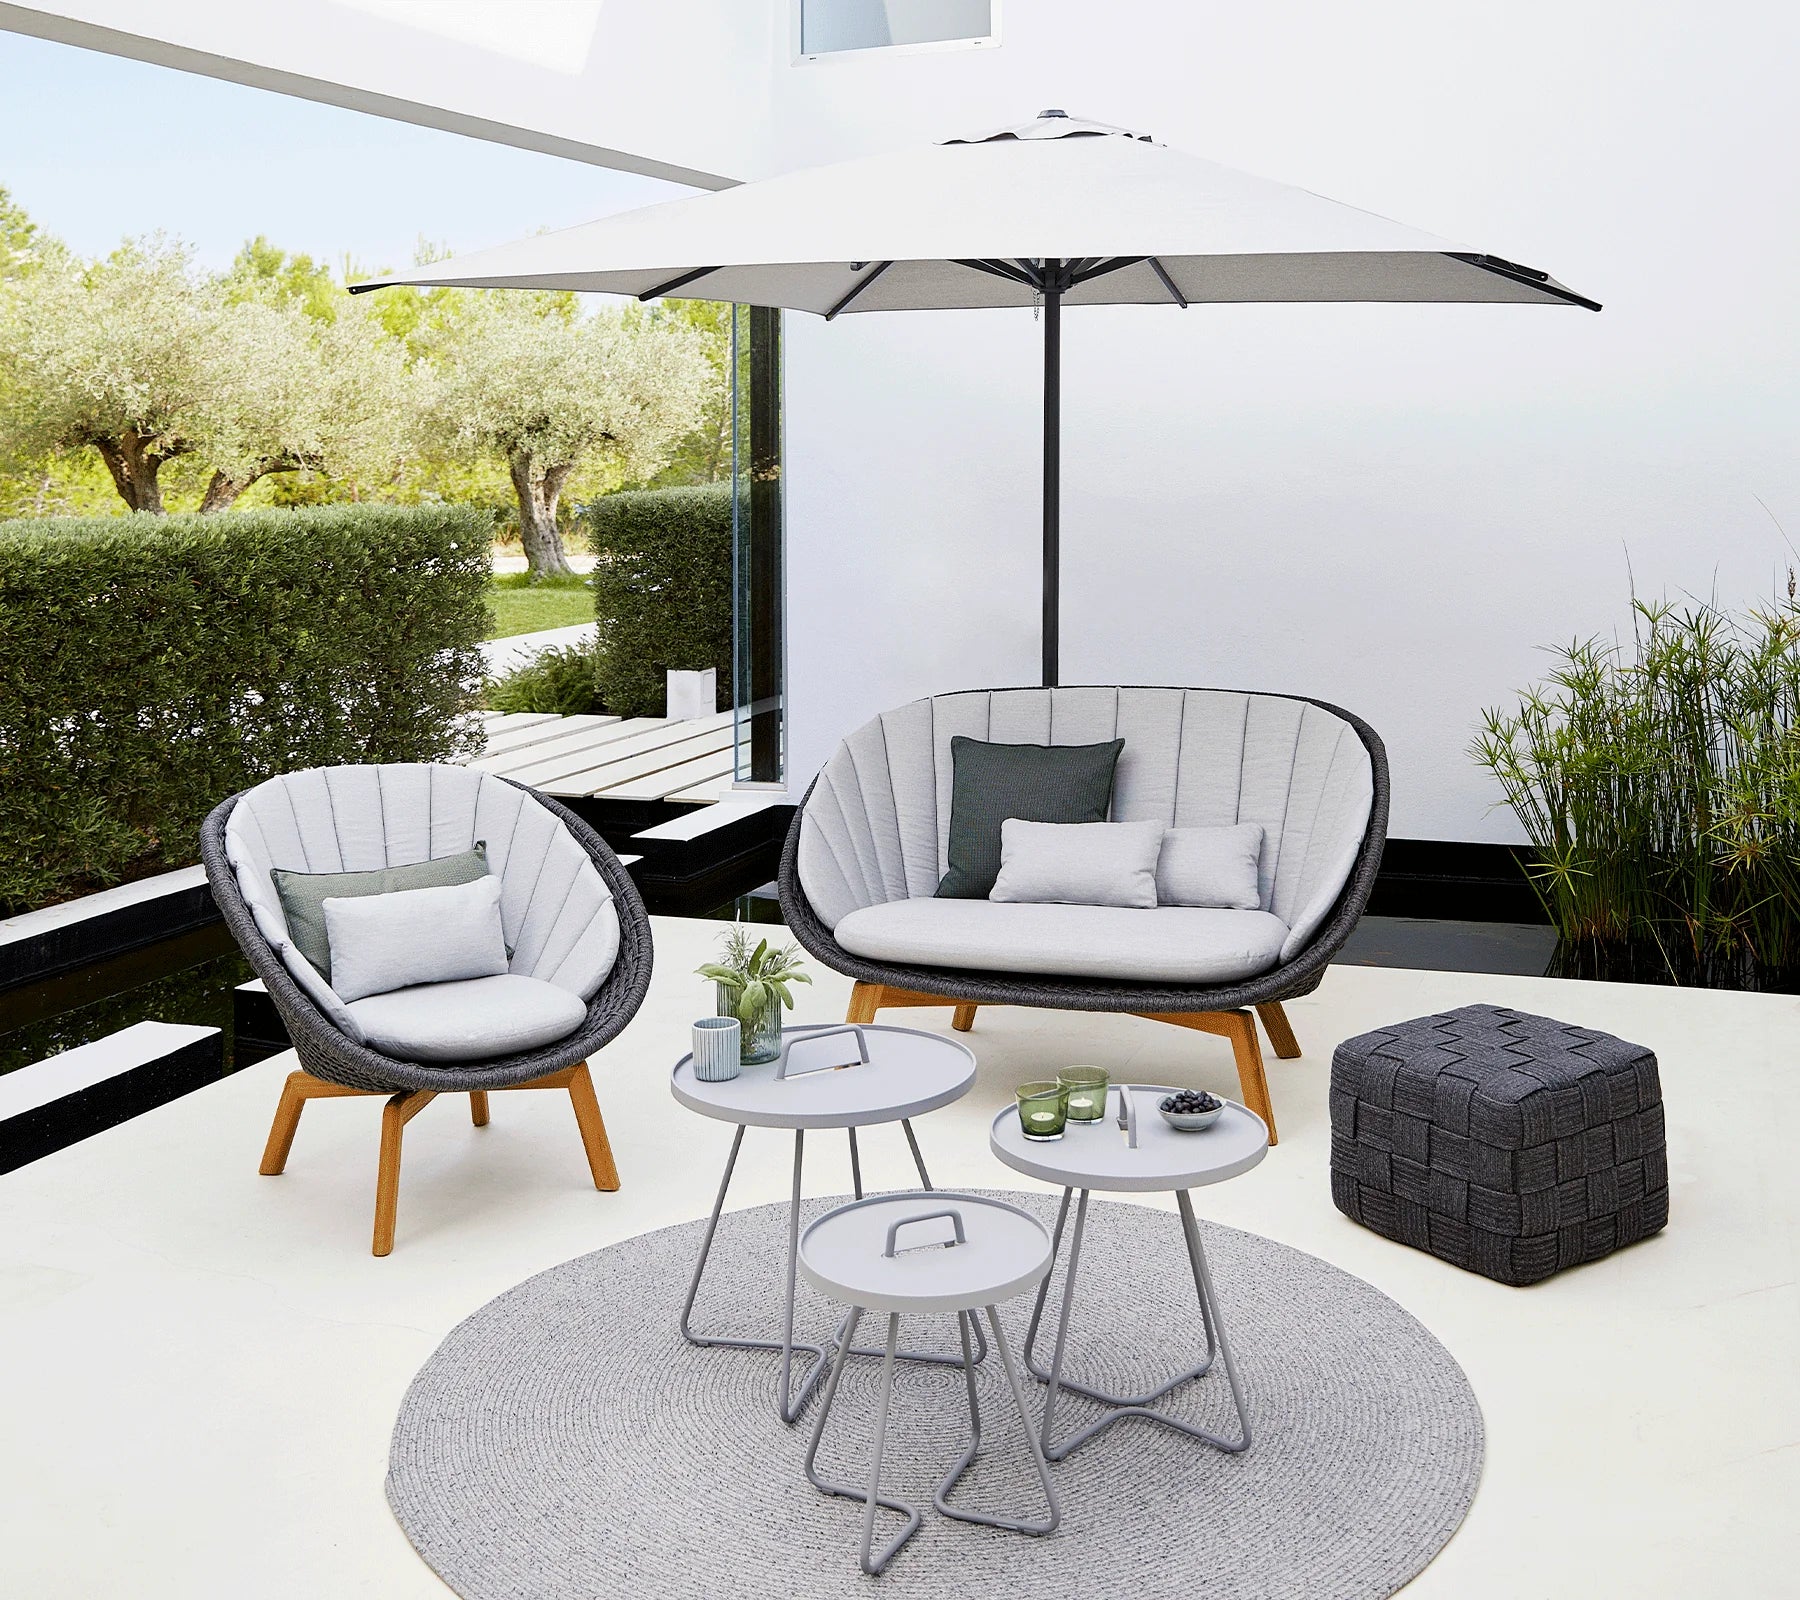 Boxhill's Peacock dark grey outdoor lounge chair with  dark grey outdoor 2-seater sofa and white parasol placed in patio